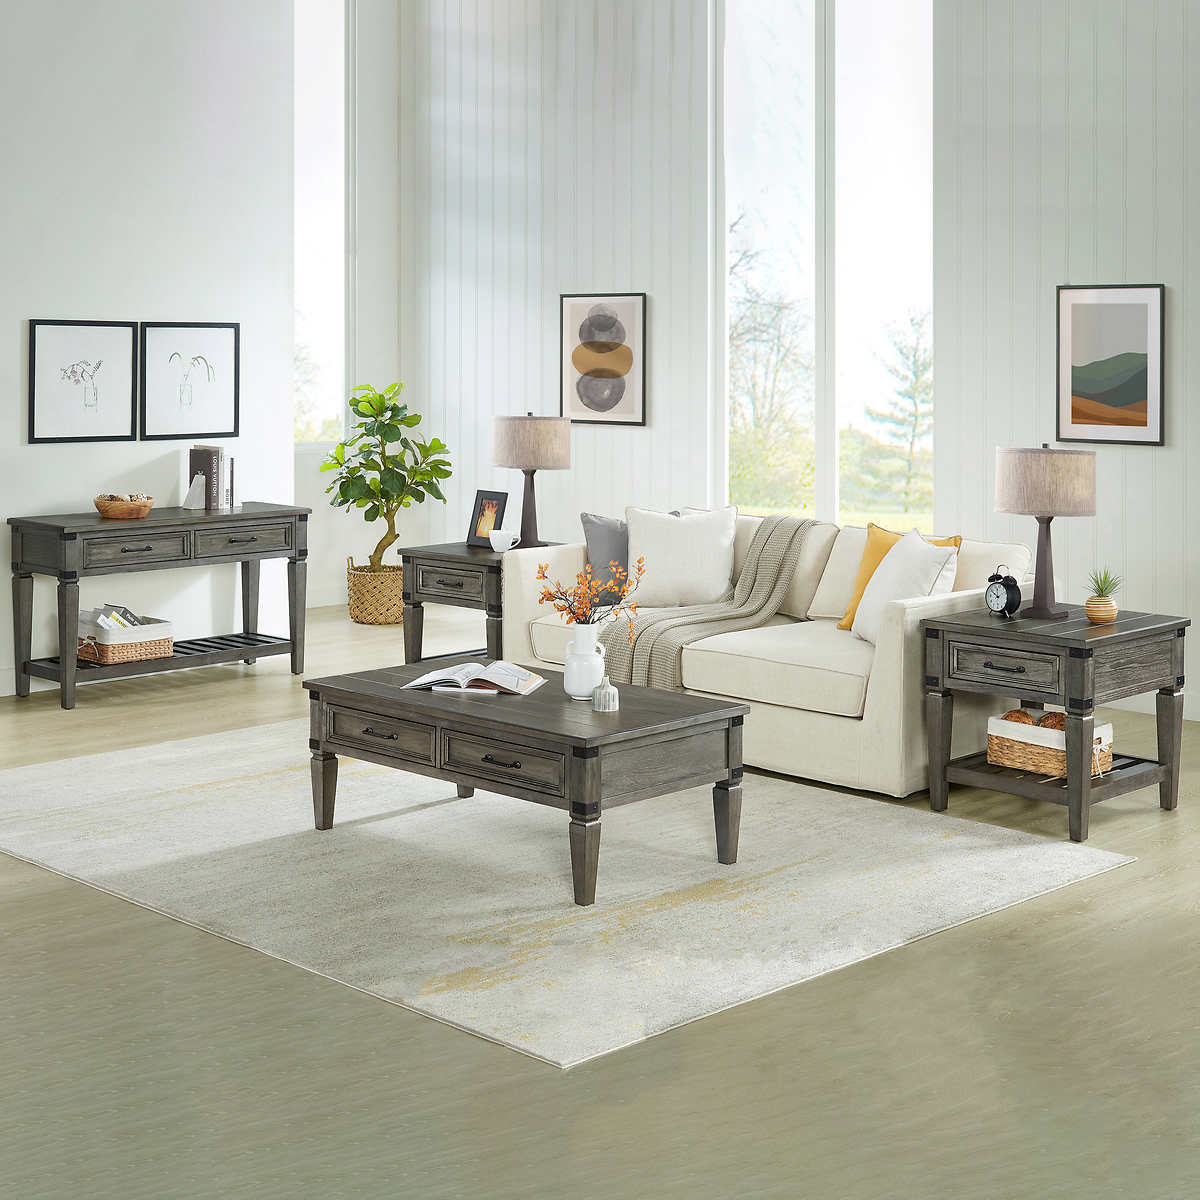 Fremont Collection 4 Piece Occasional, Monroe Park Brushed Pewter Oak Laminate Flooring Reviews